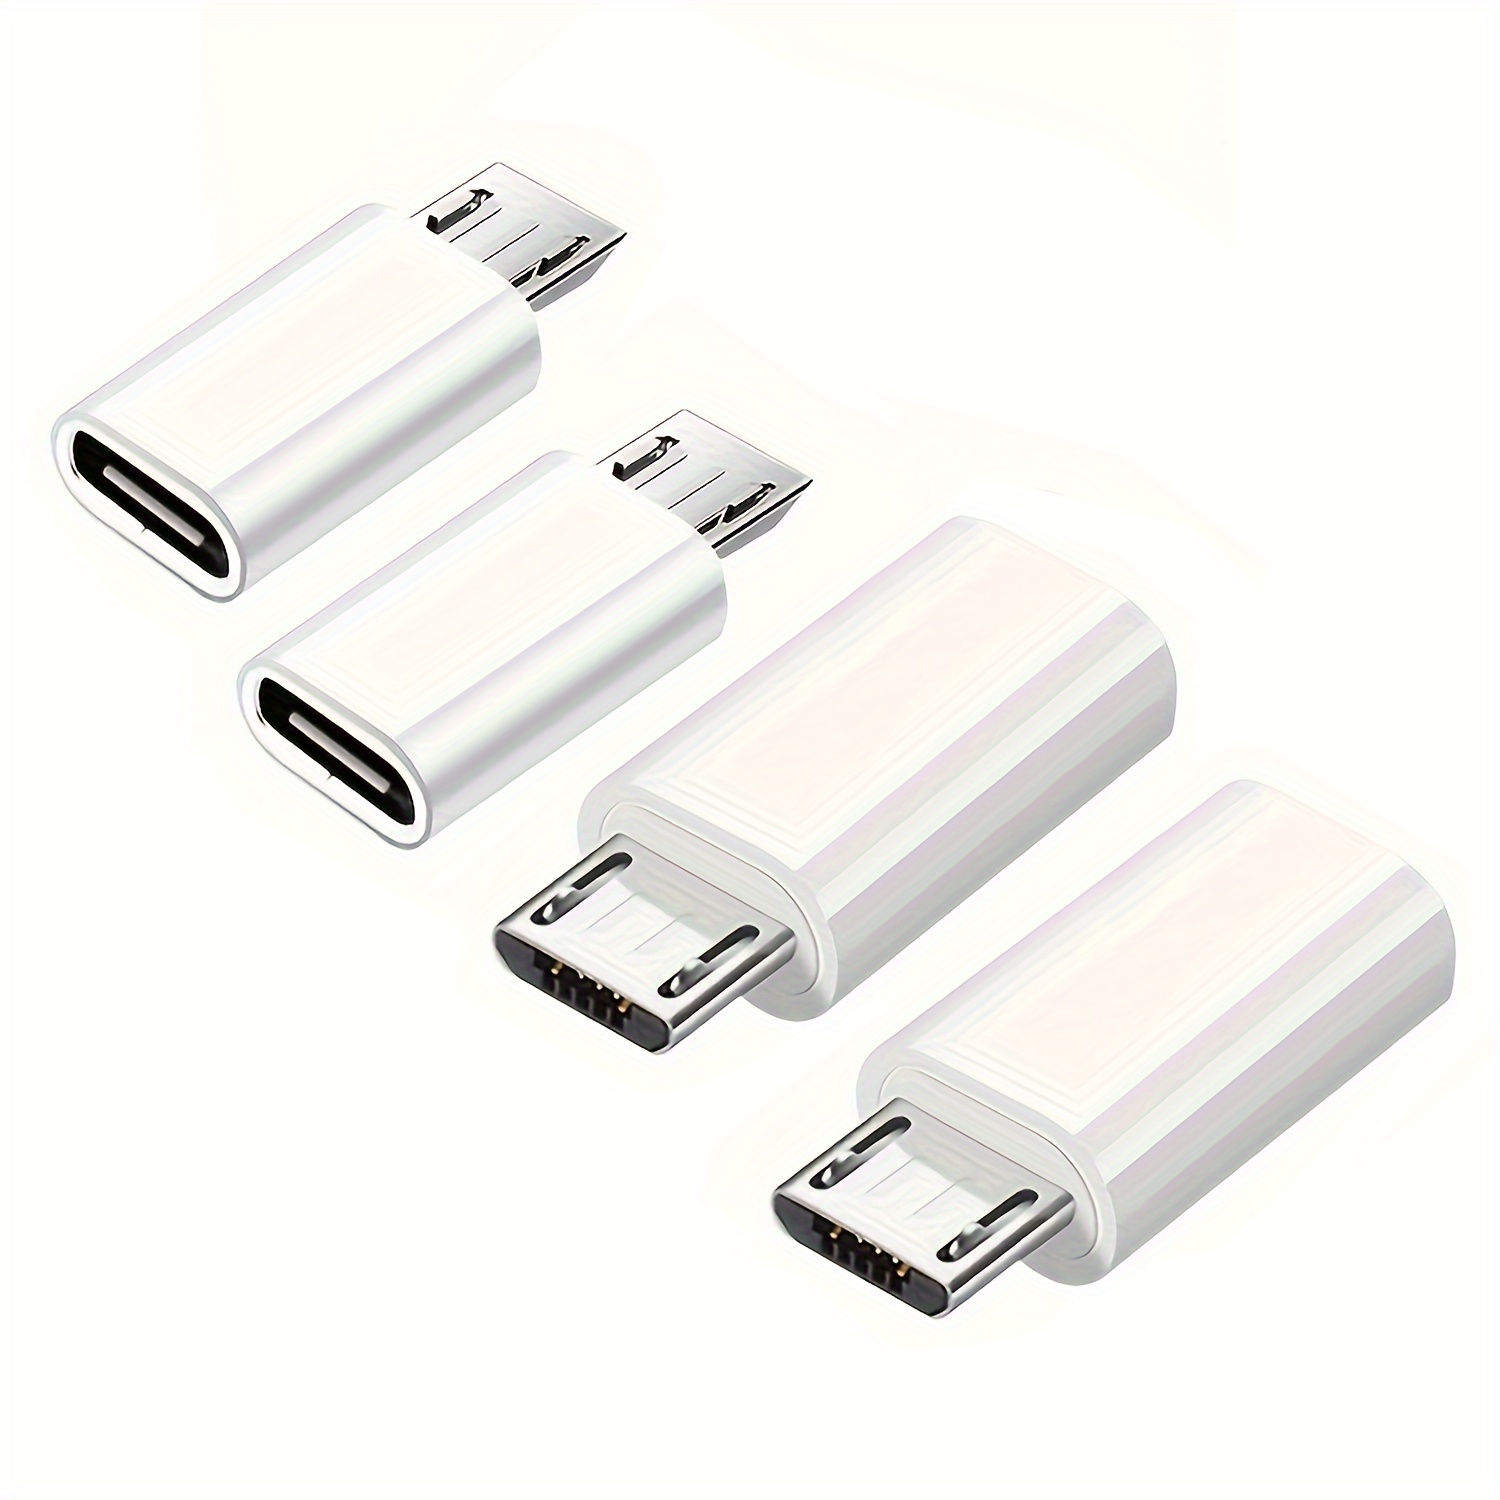 

4-piece Usb-c To Micro Usb Adapter - Fast Charge & Sync Converter For Samsung Galaxy, Lg Nexus & More - White Fast Charger